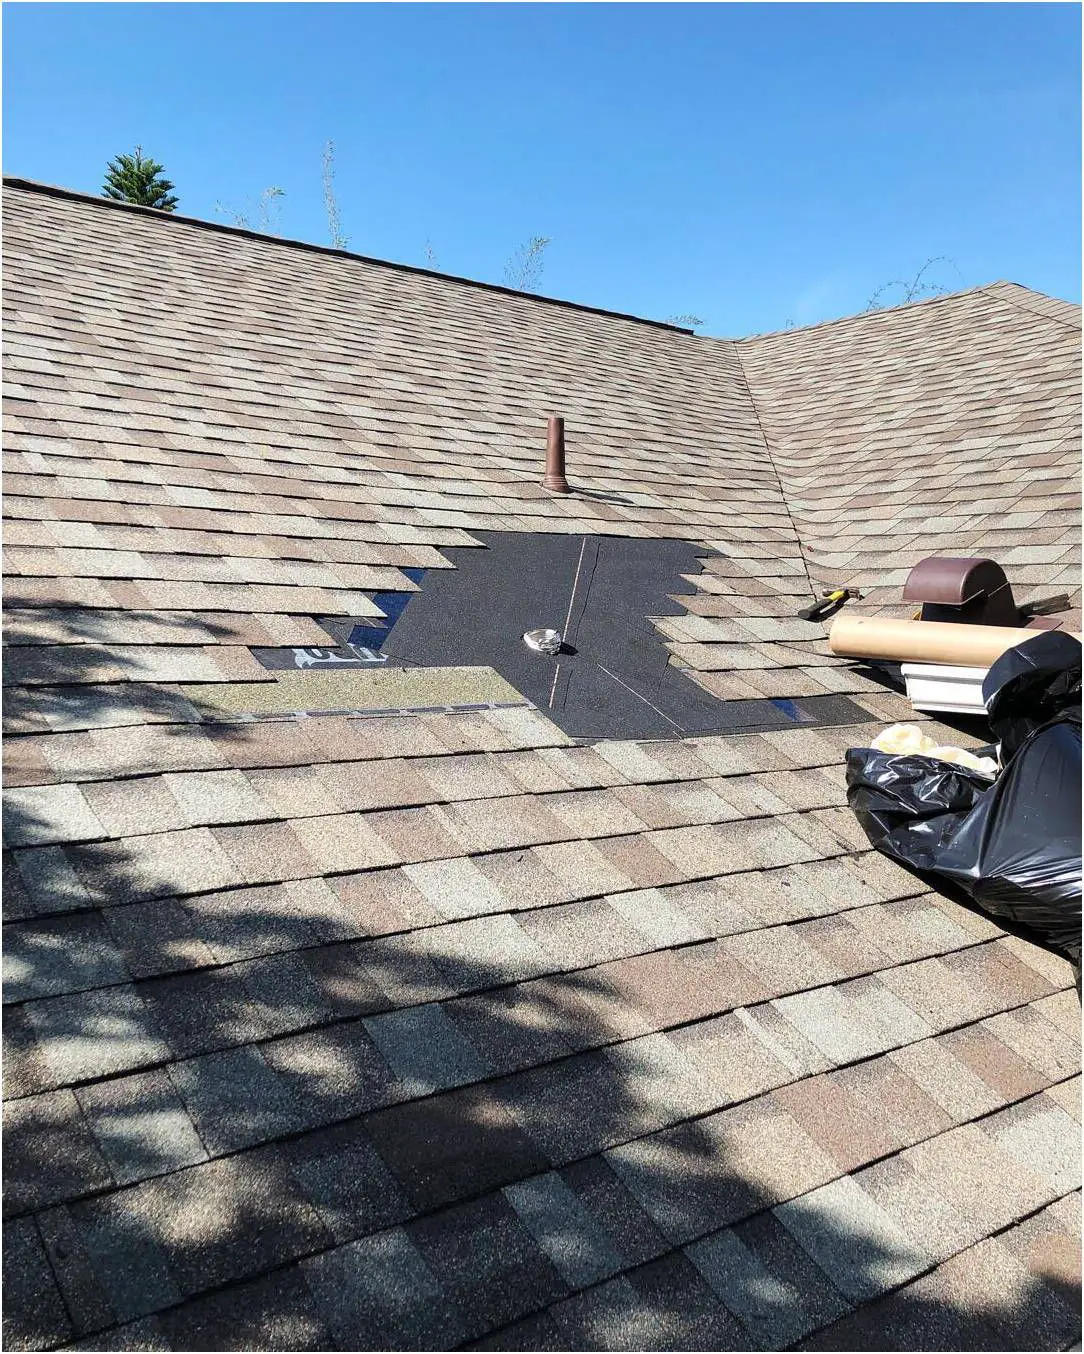 Fantastic Tips For Maintaining The Roof Of Your Home